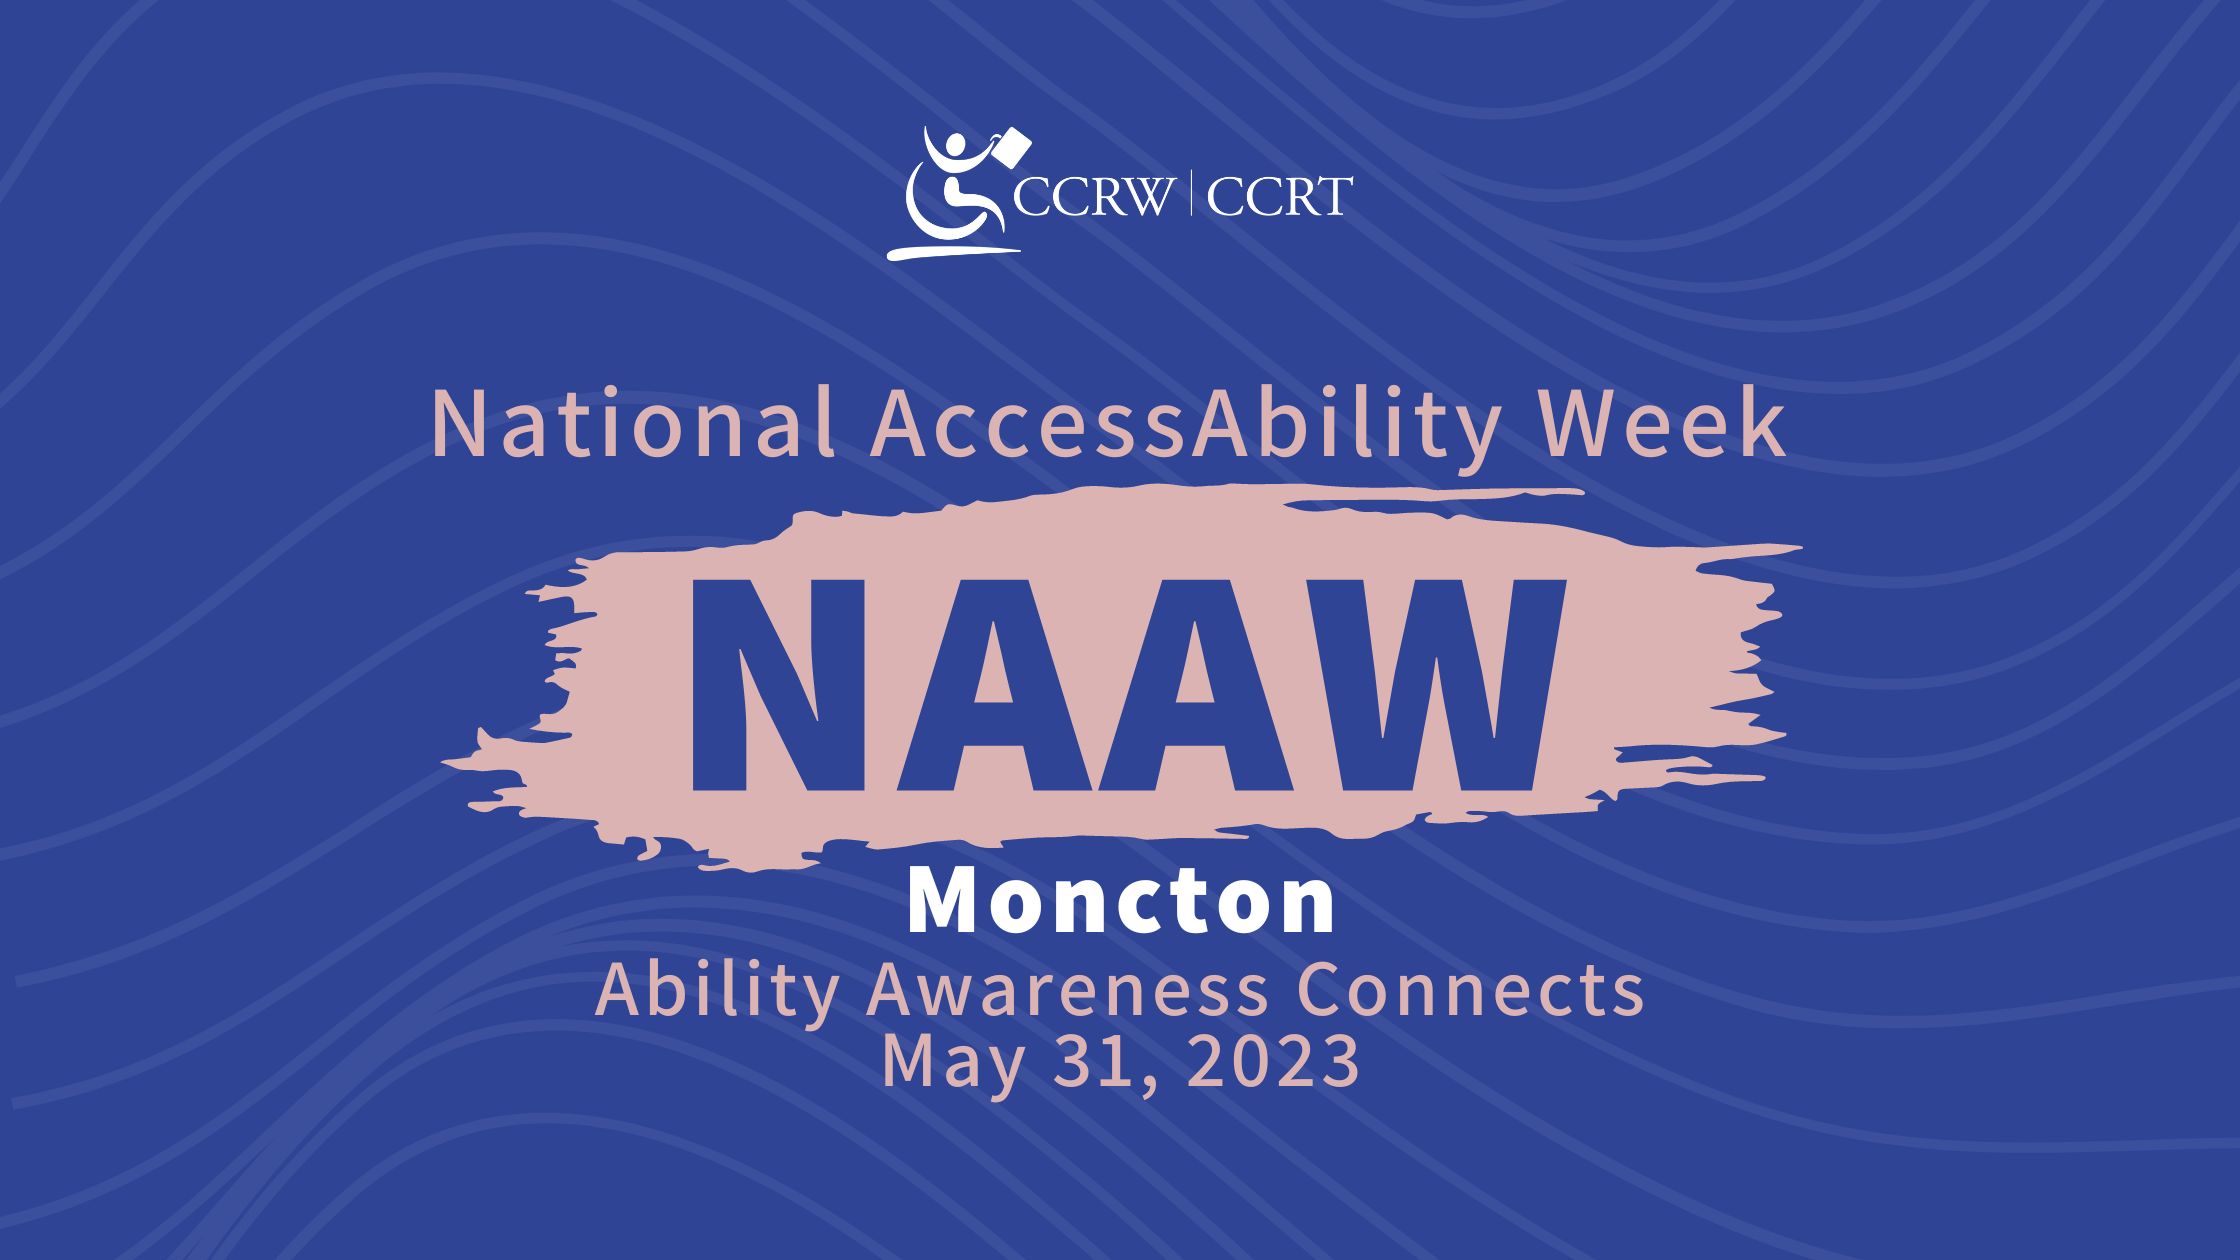 NAAW 2023 – Moncton: Ability Awareness Connects